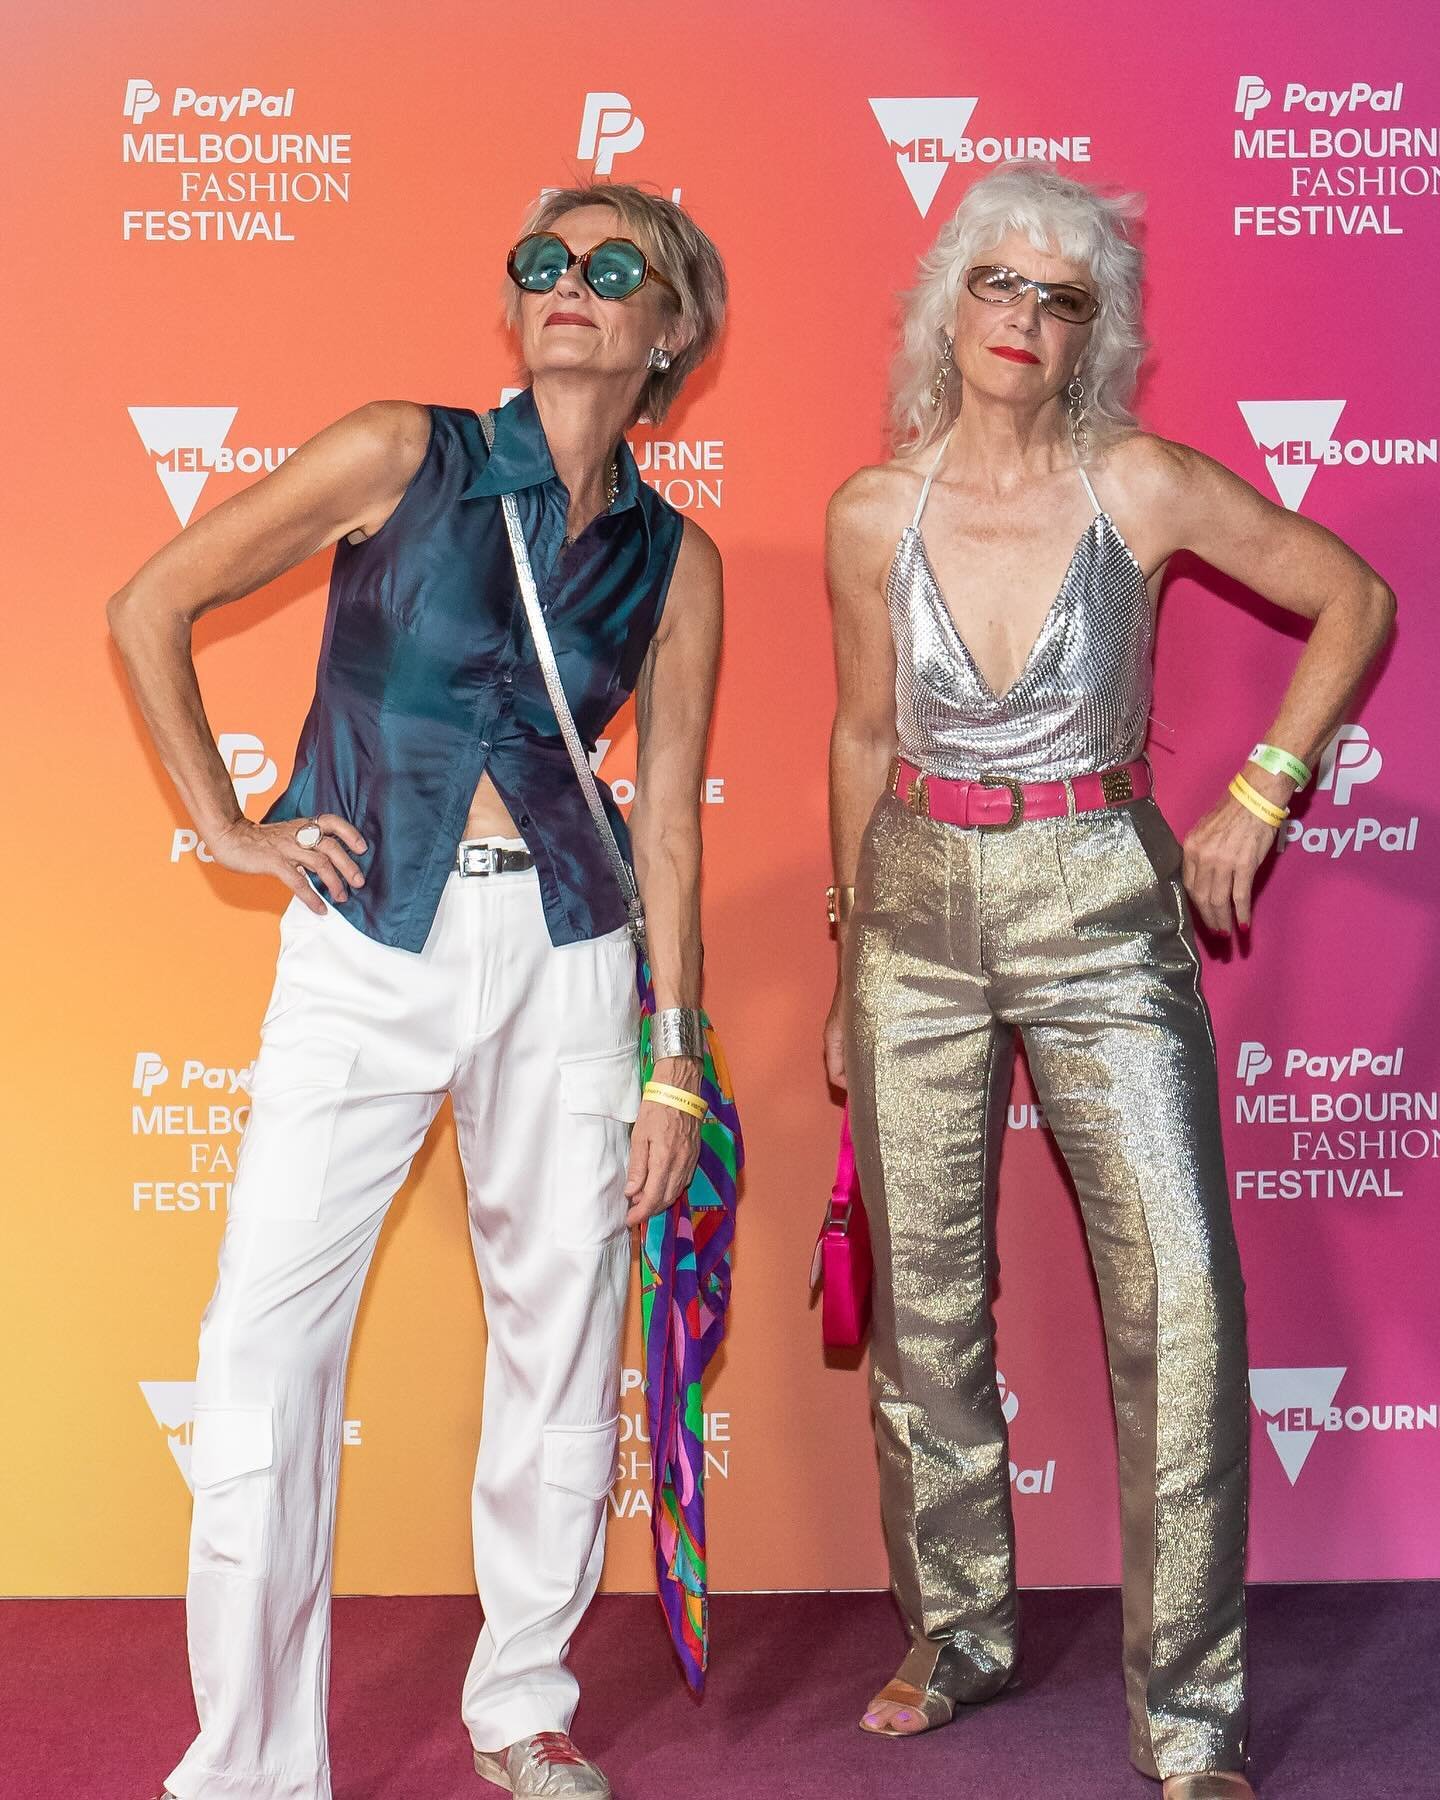 MEDIA WALL MOMENTS. Each night&nbsp;our Premium Runways drew Melbourne&rsquo;s hottest fashionistas. Swipe for some of our&nbsp;favourite snaps as attendees stopped en route to their seats! 📸

#PayPalPayin4 #PayPalMFF